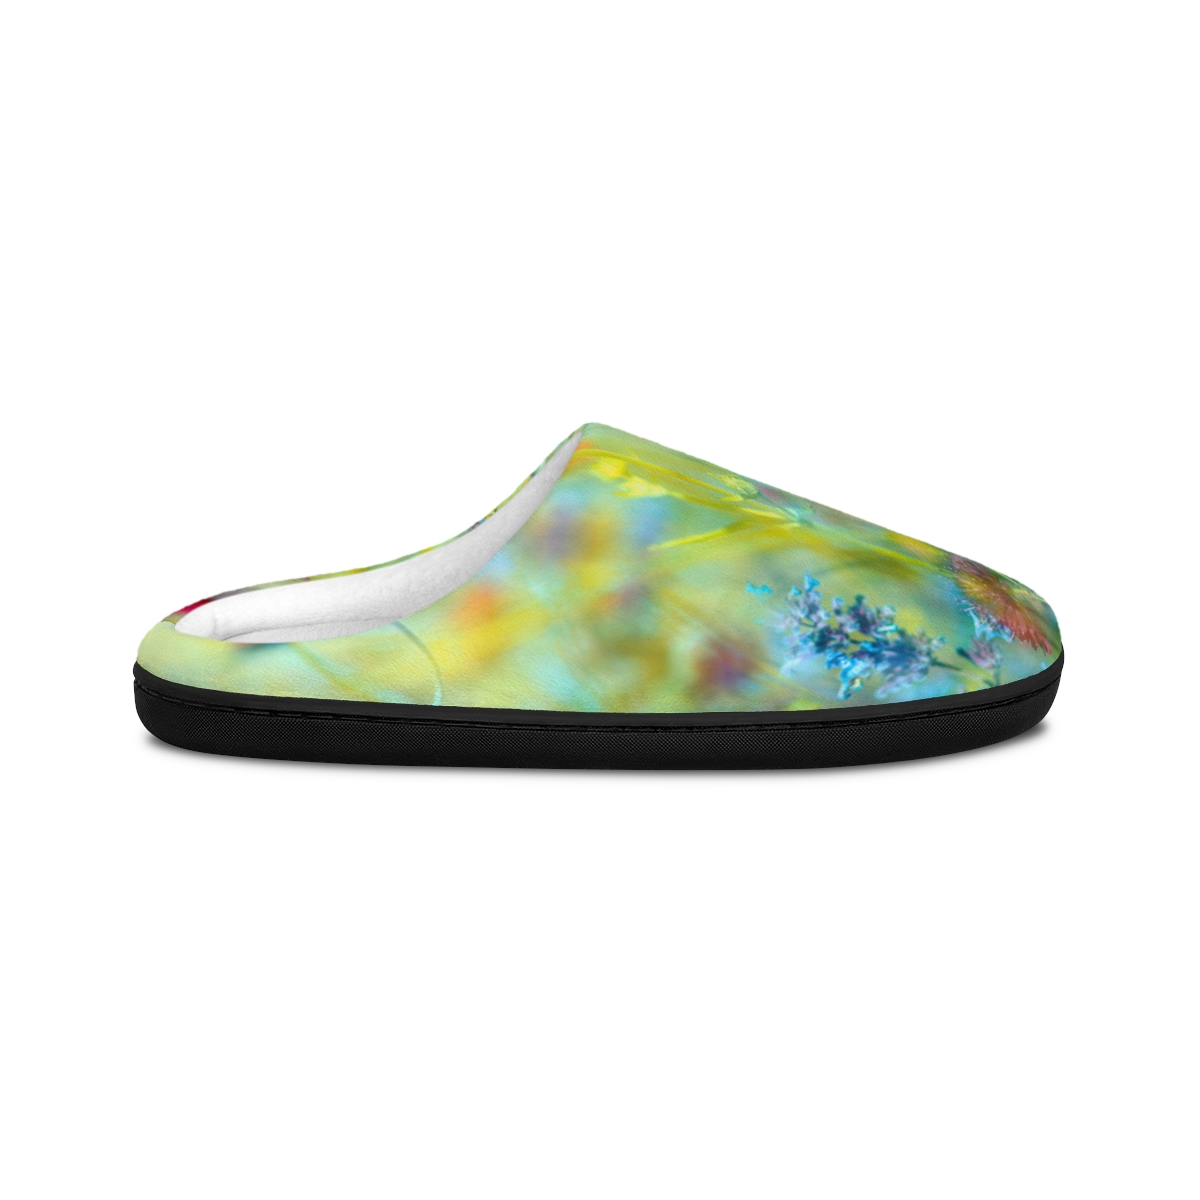 Women's Indoor Slippers product thumbnail image